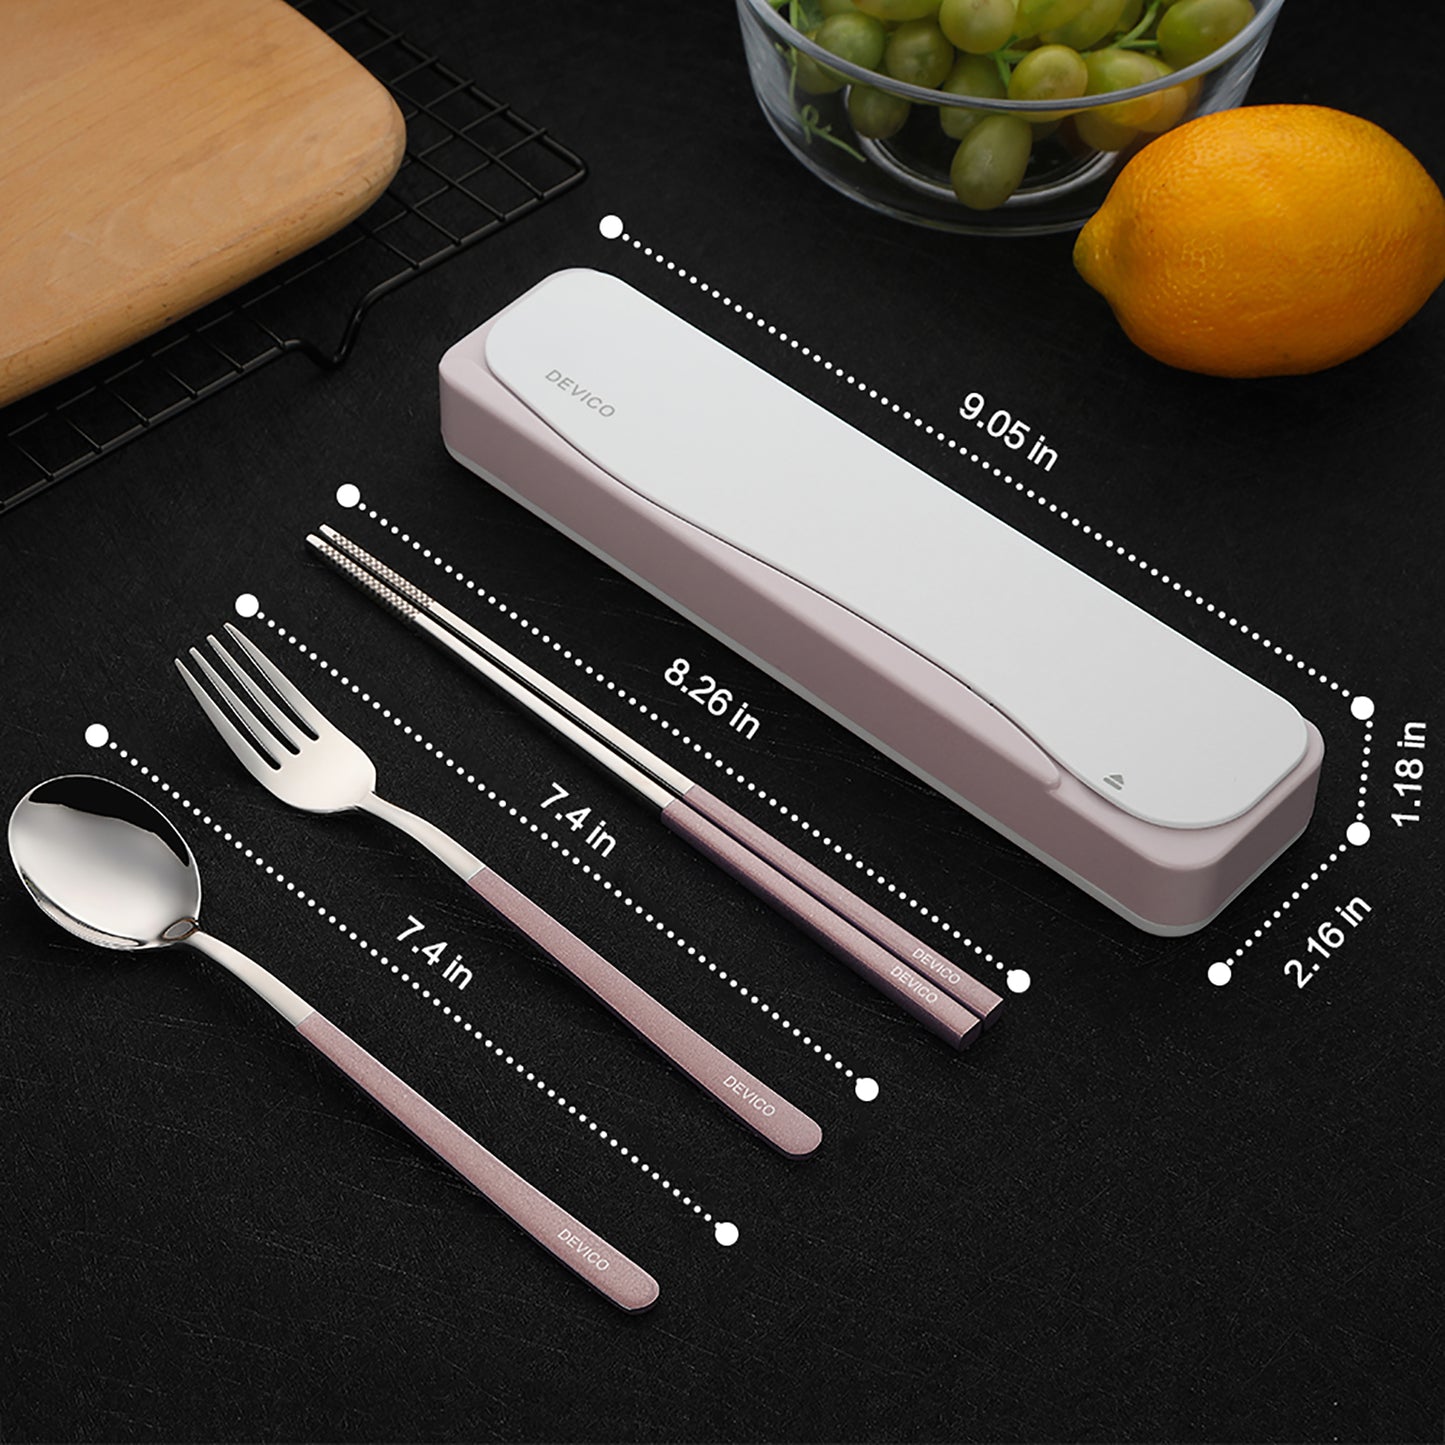 DEVICO Travel Utensils, 18/8 Stainless Steel 4pcs Cutlery Set Portable Camp Reusable Flatware Silverware, Include Fork Spoon Chopsticks with Case (Pink)